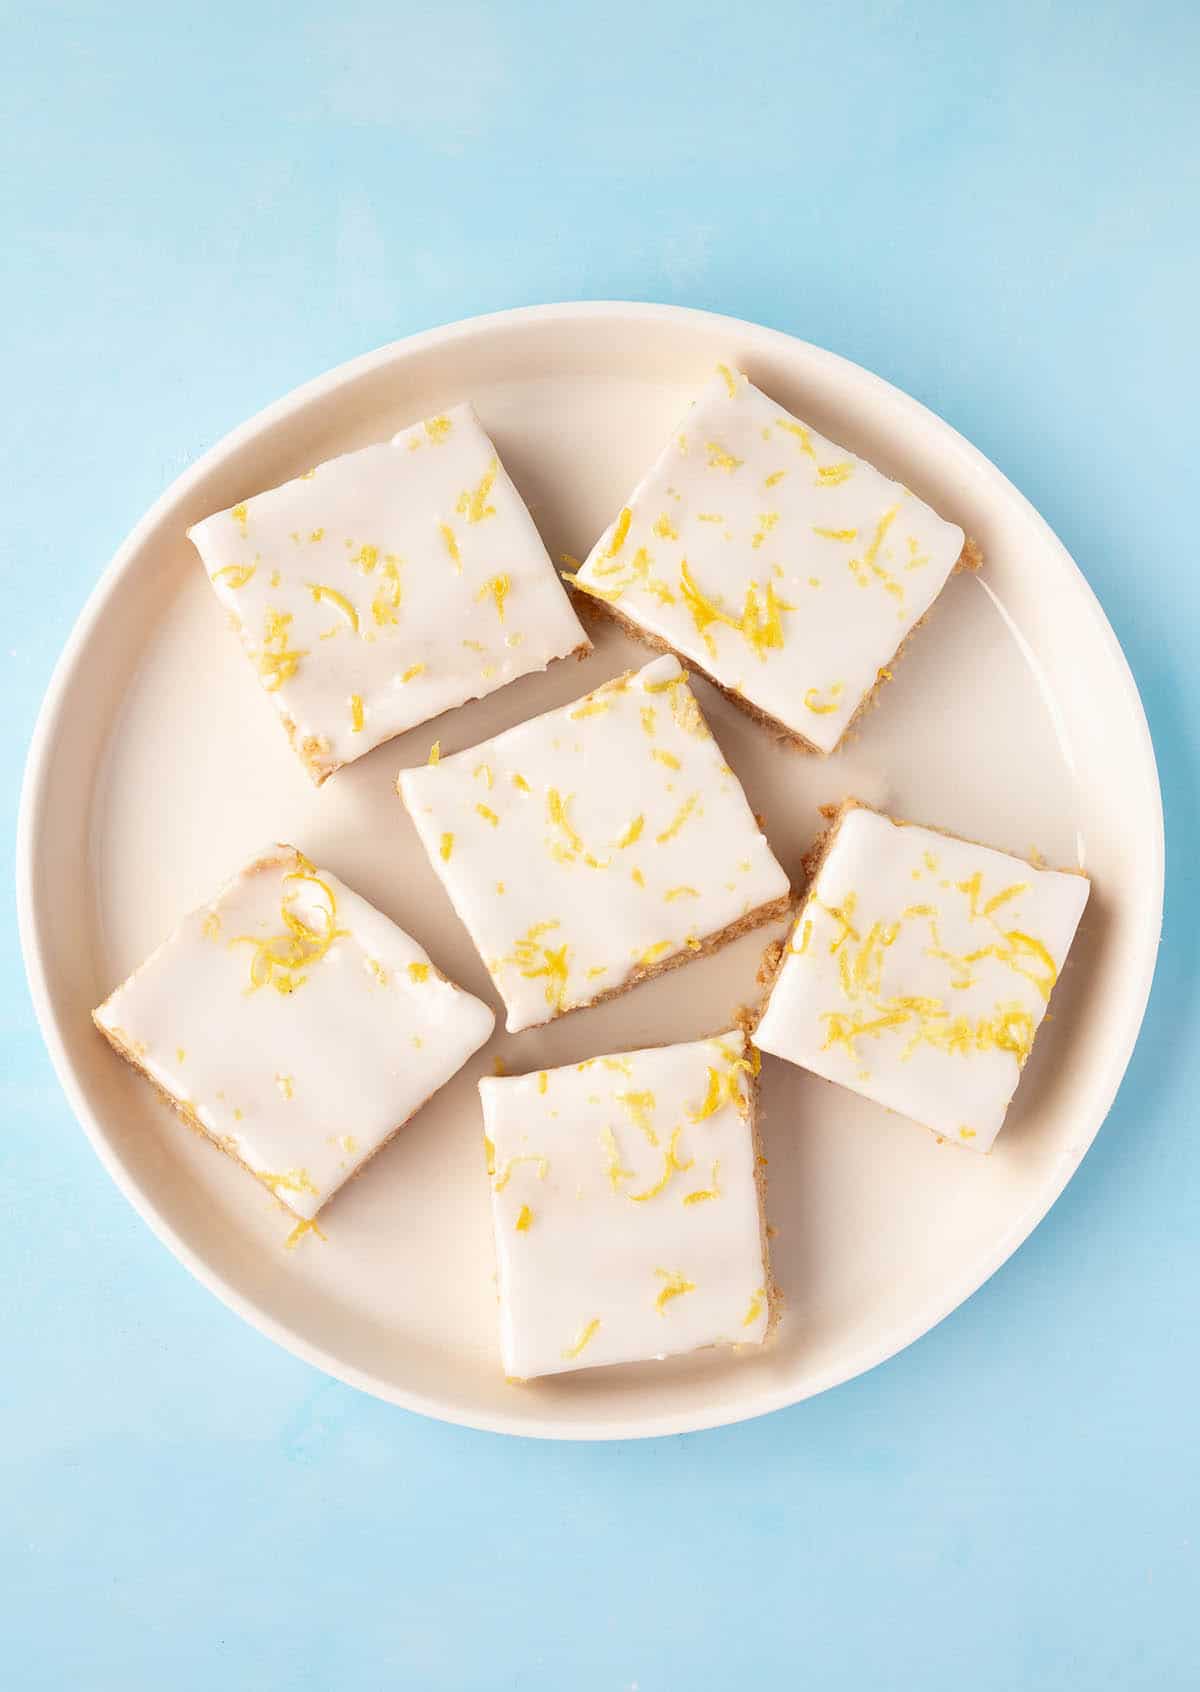 Top view of a plate of Lemon Slices decorated with lemon zest. 